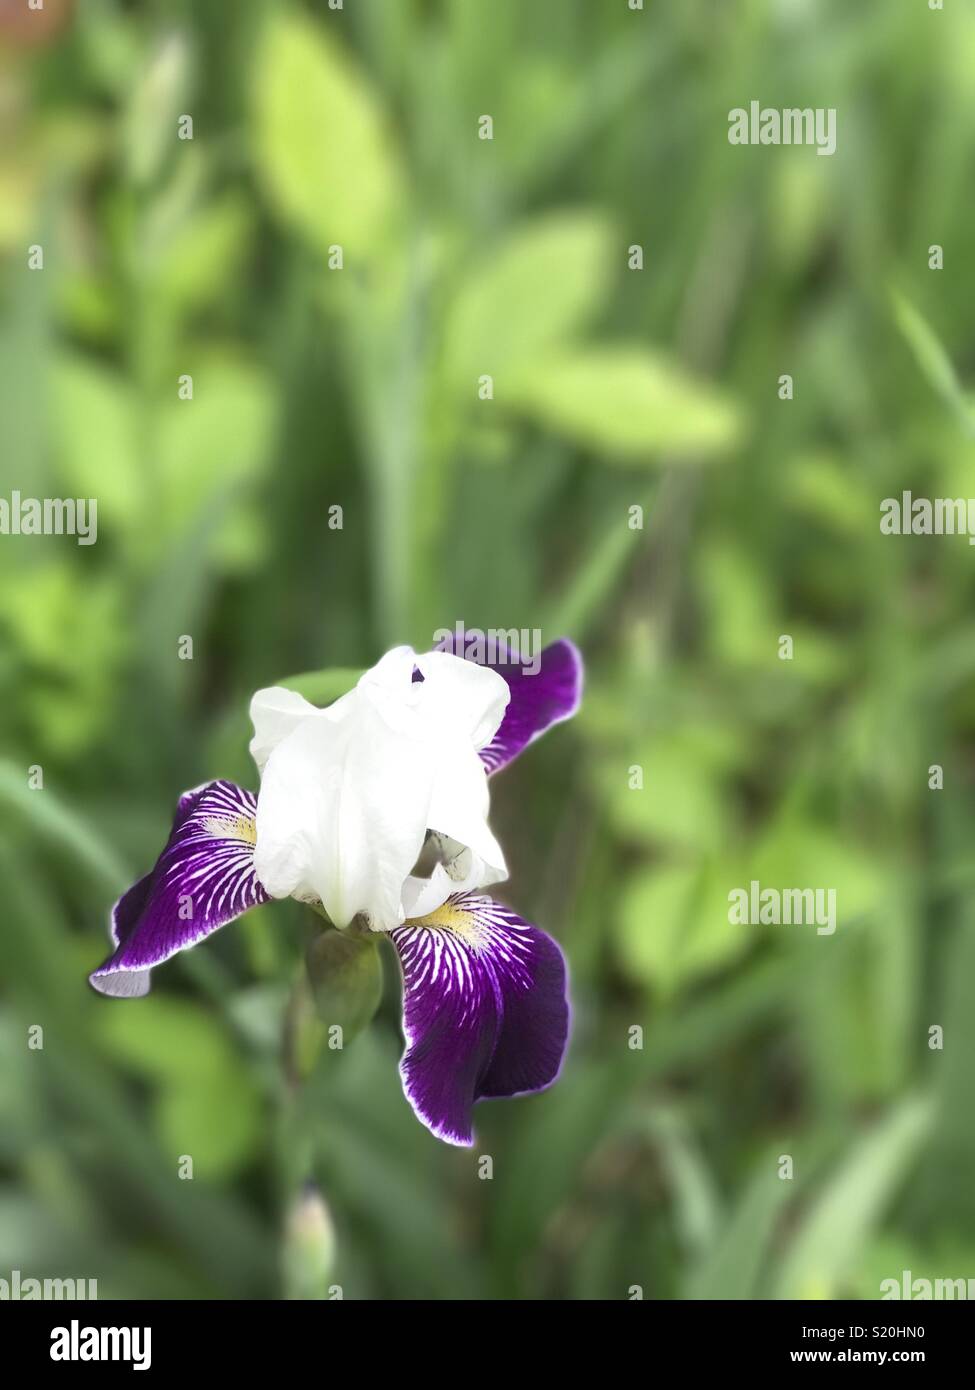 Bearded iris with white petals and purple falls petals Stock Photo